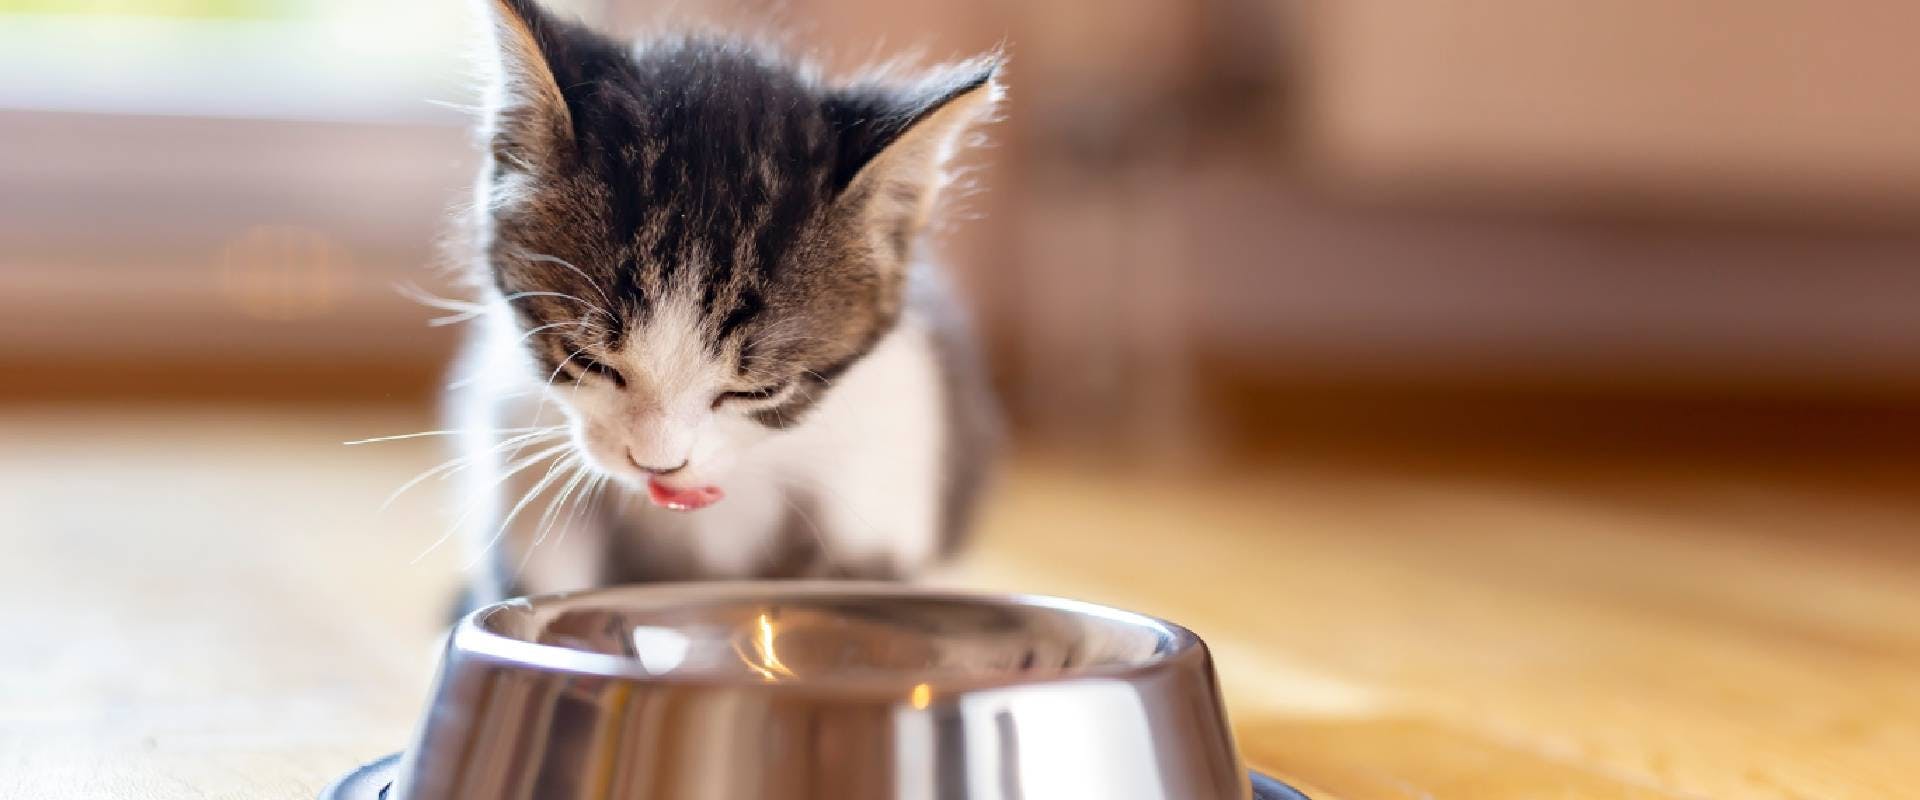 small kitten licking from a metal bowl